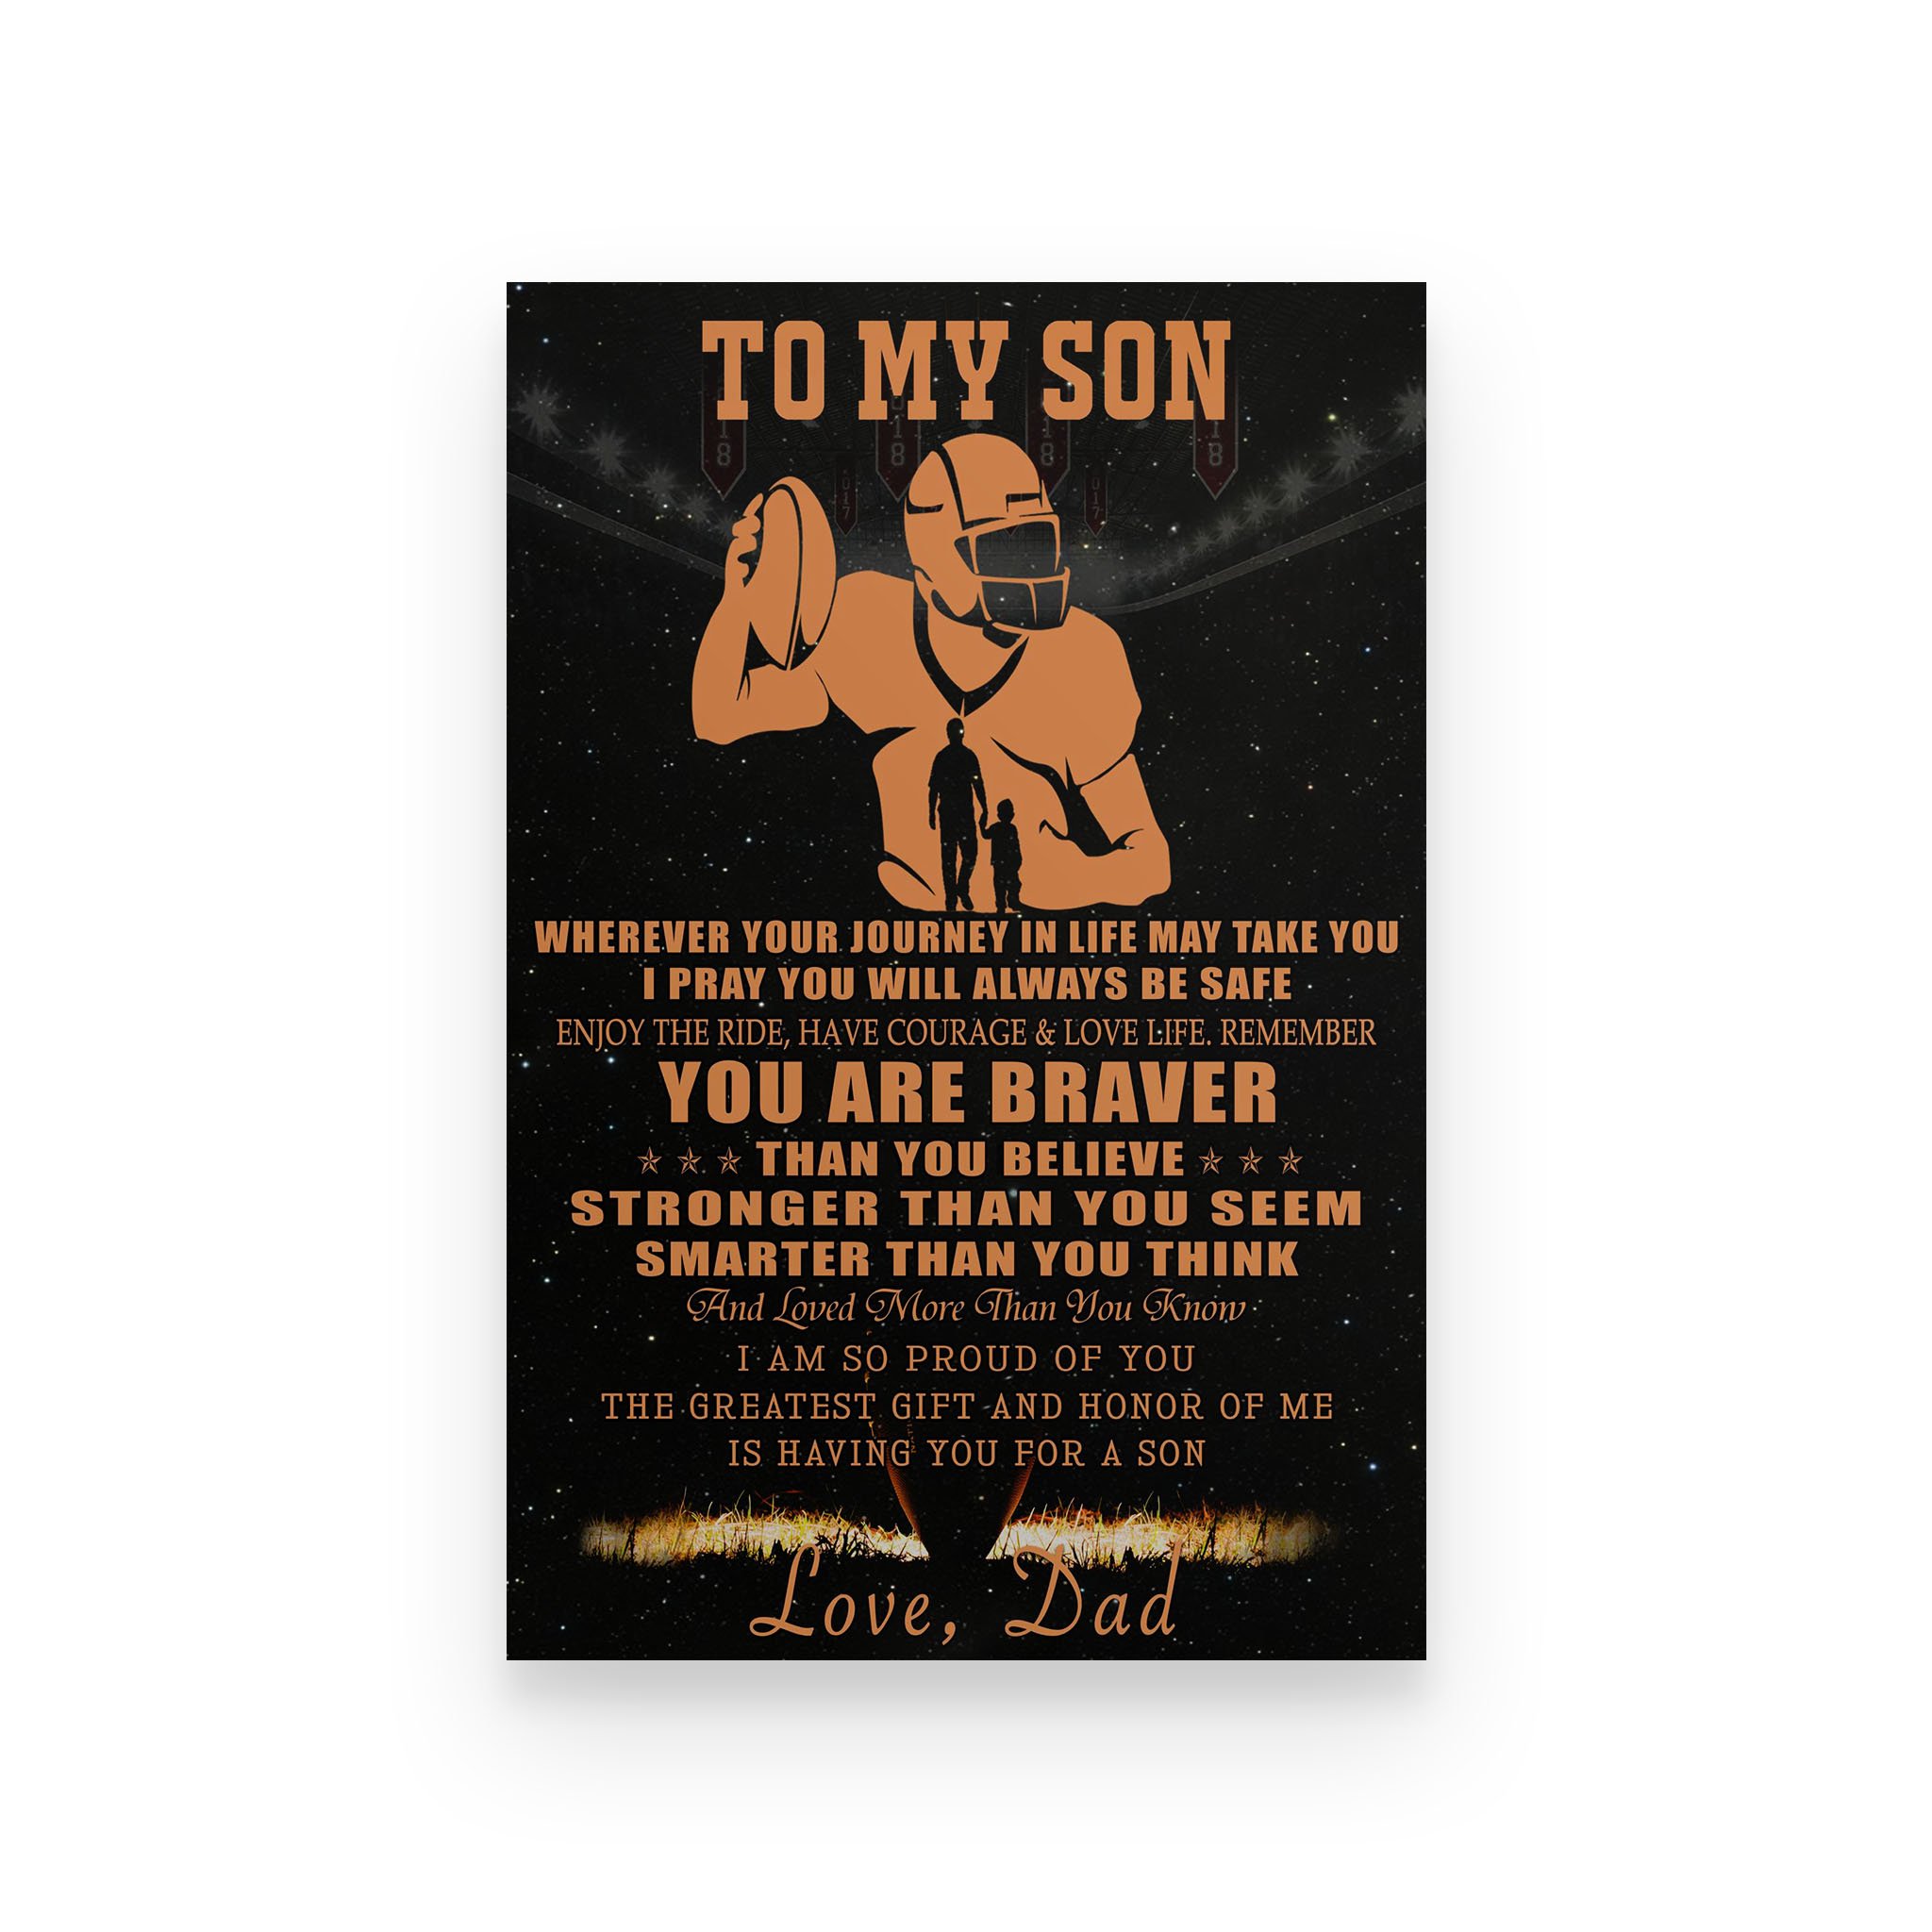 American football poster dad to son Wherever your journey in life may take you